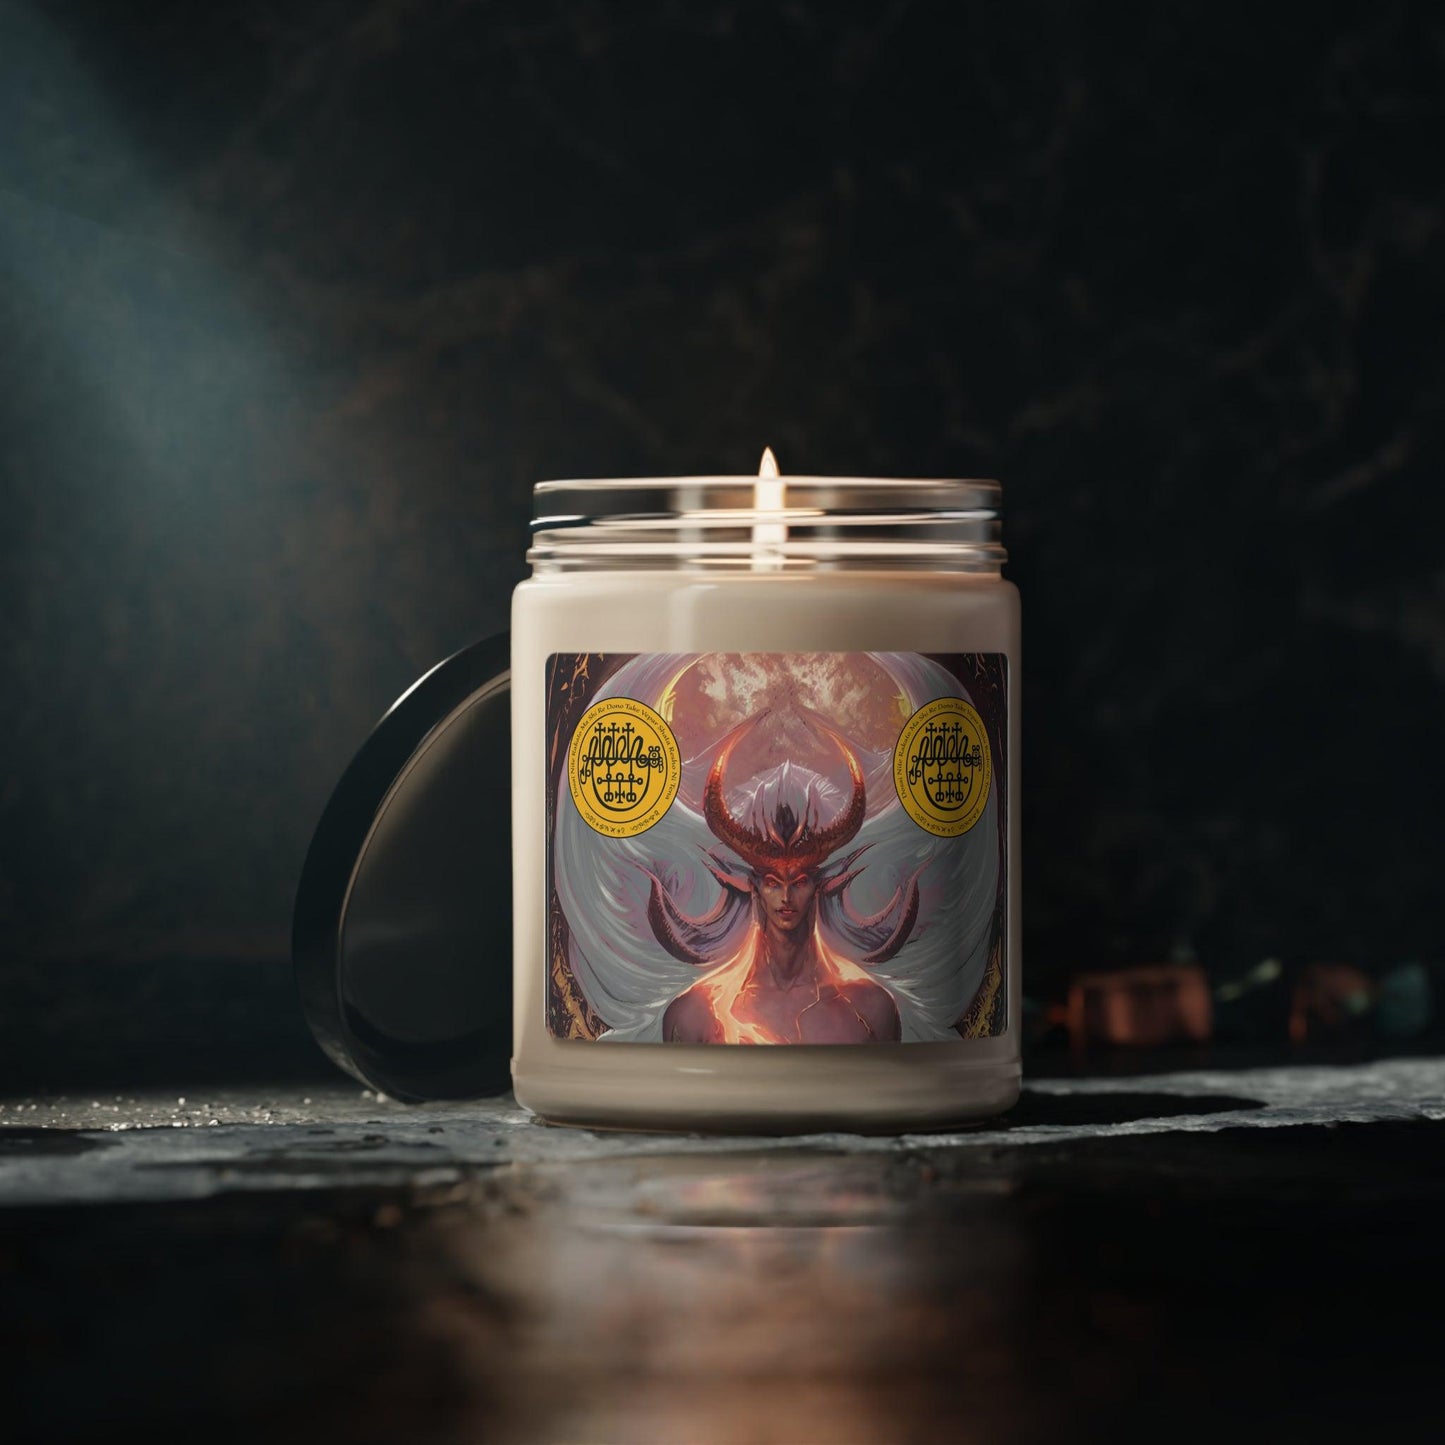 Demon-Vepar-Altar-Scented-Soy-Candle-for-offerings-rituals-initiations-o-praying-and-medtation-25